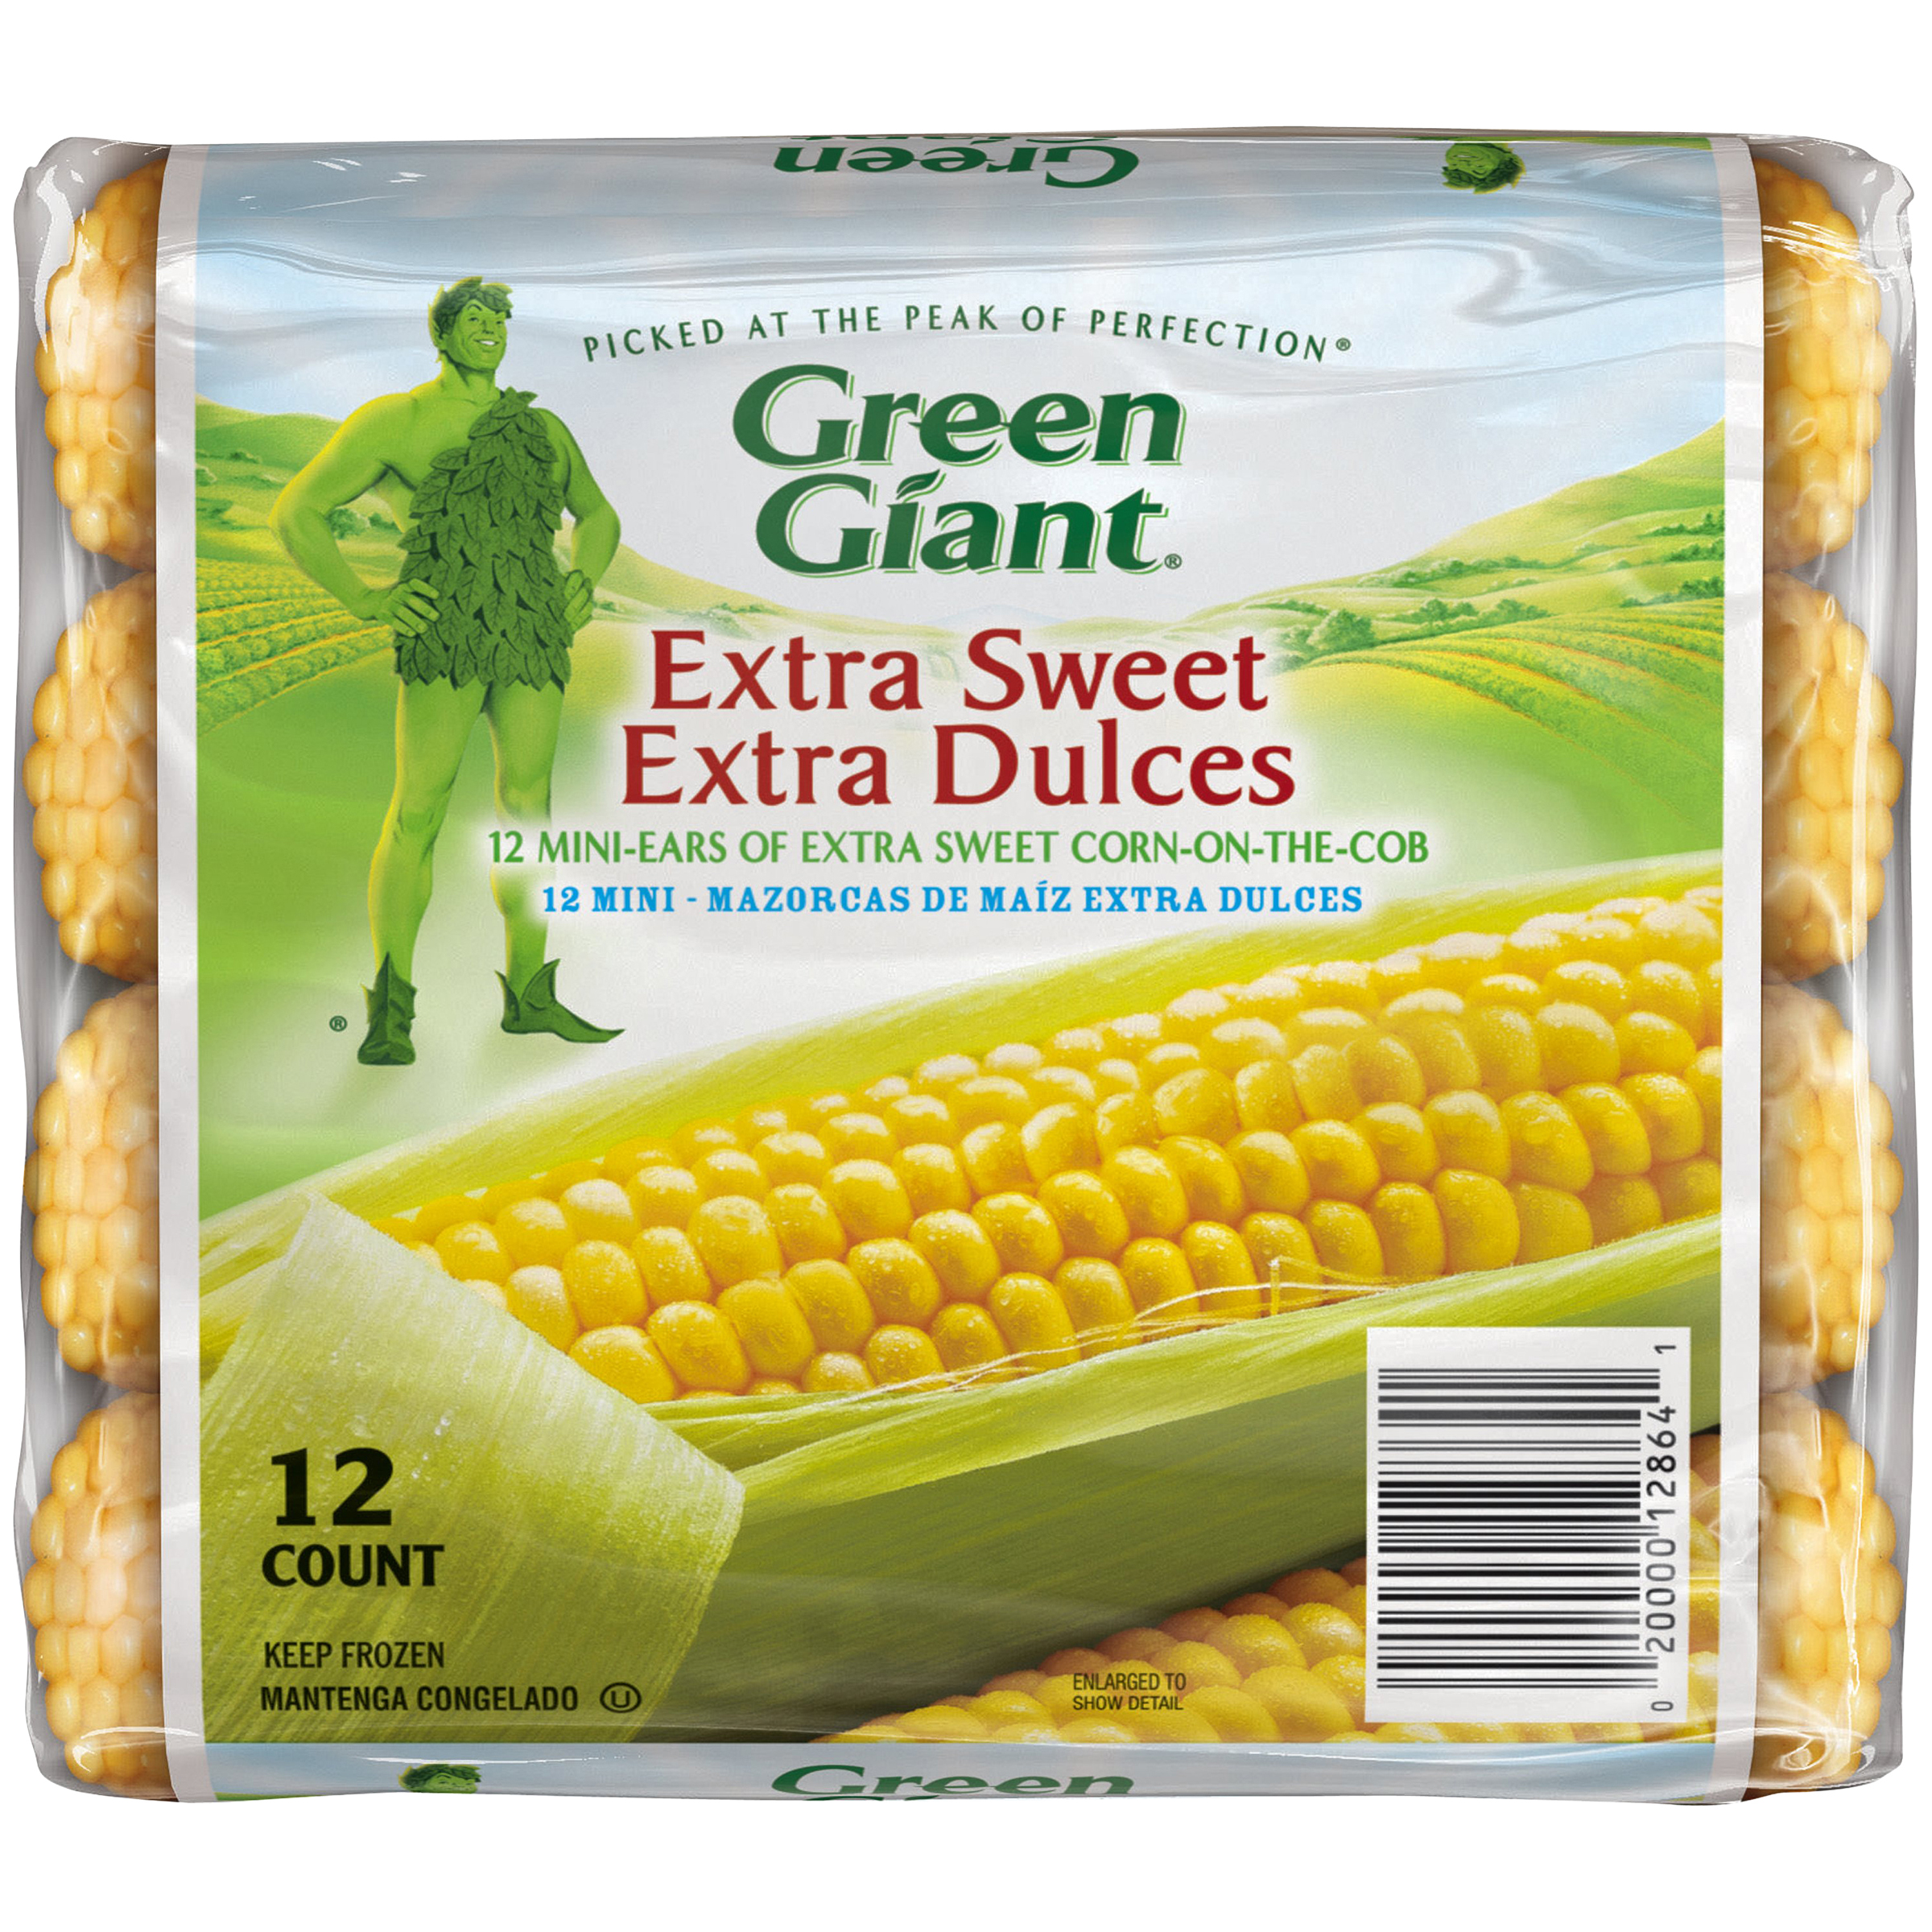 UPC 020000128641 product image for Extra Sweet Mini Ears Corn-on-the-Cob 12 CT PACK | upcitemdb.com